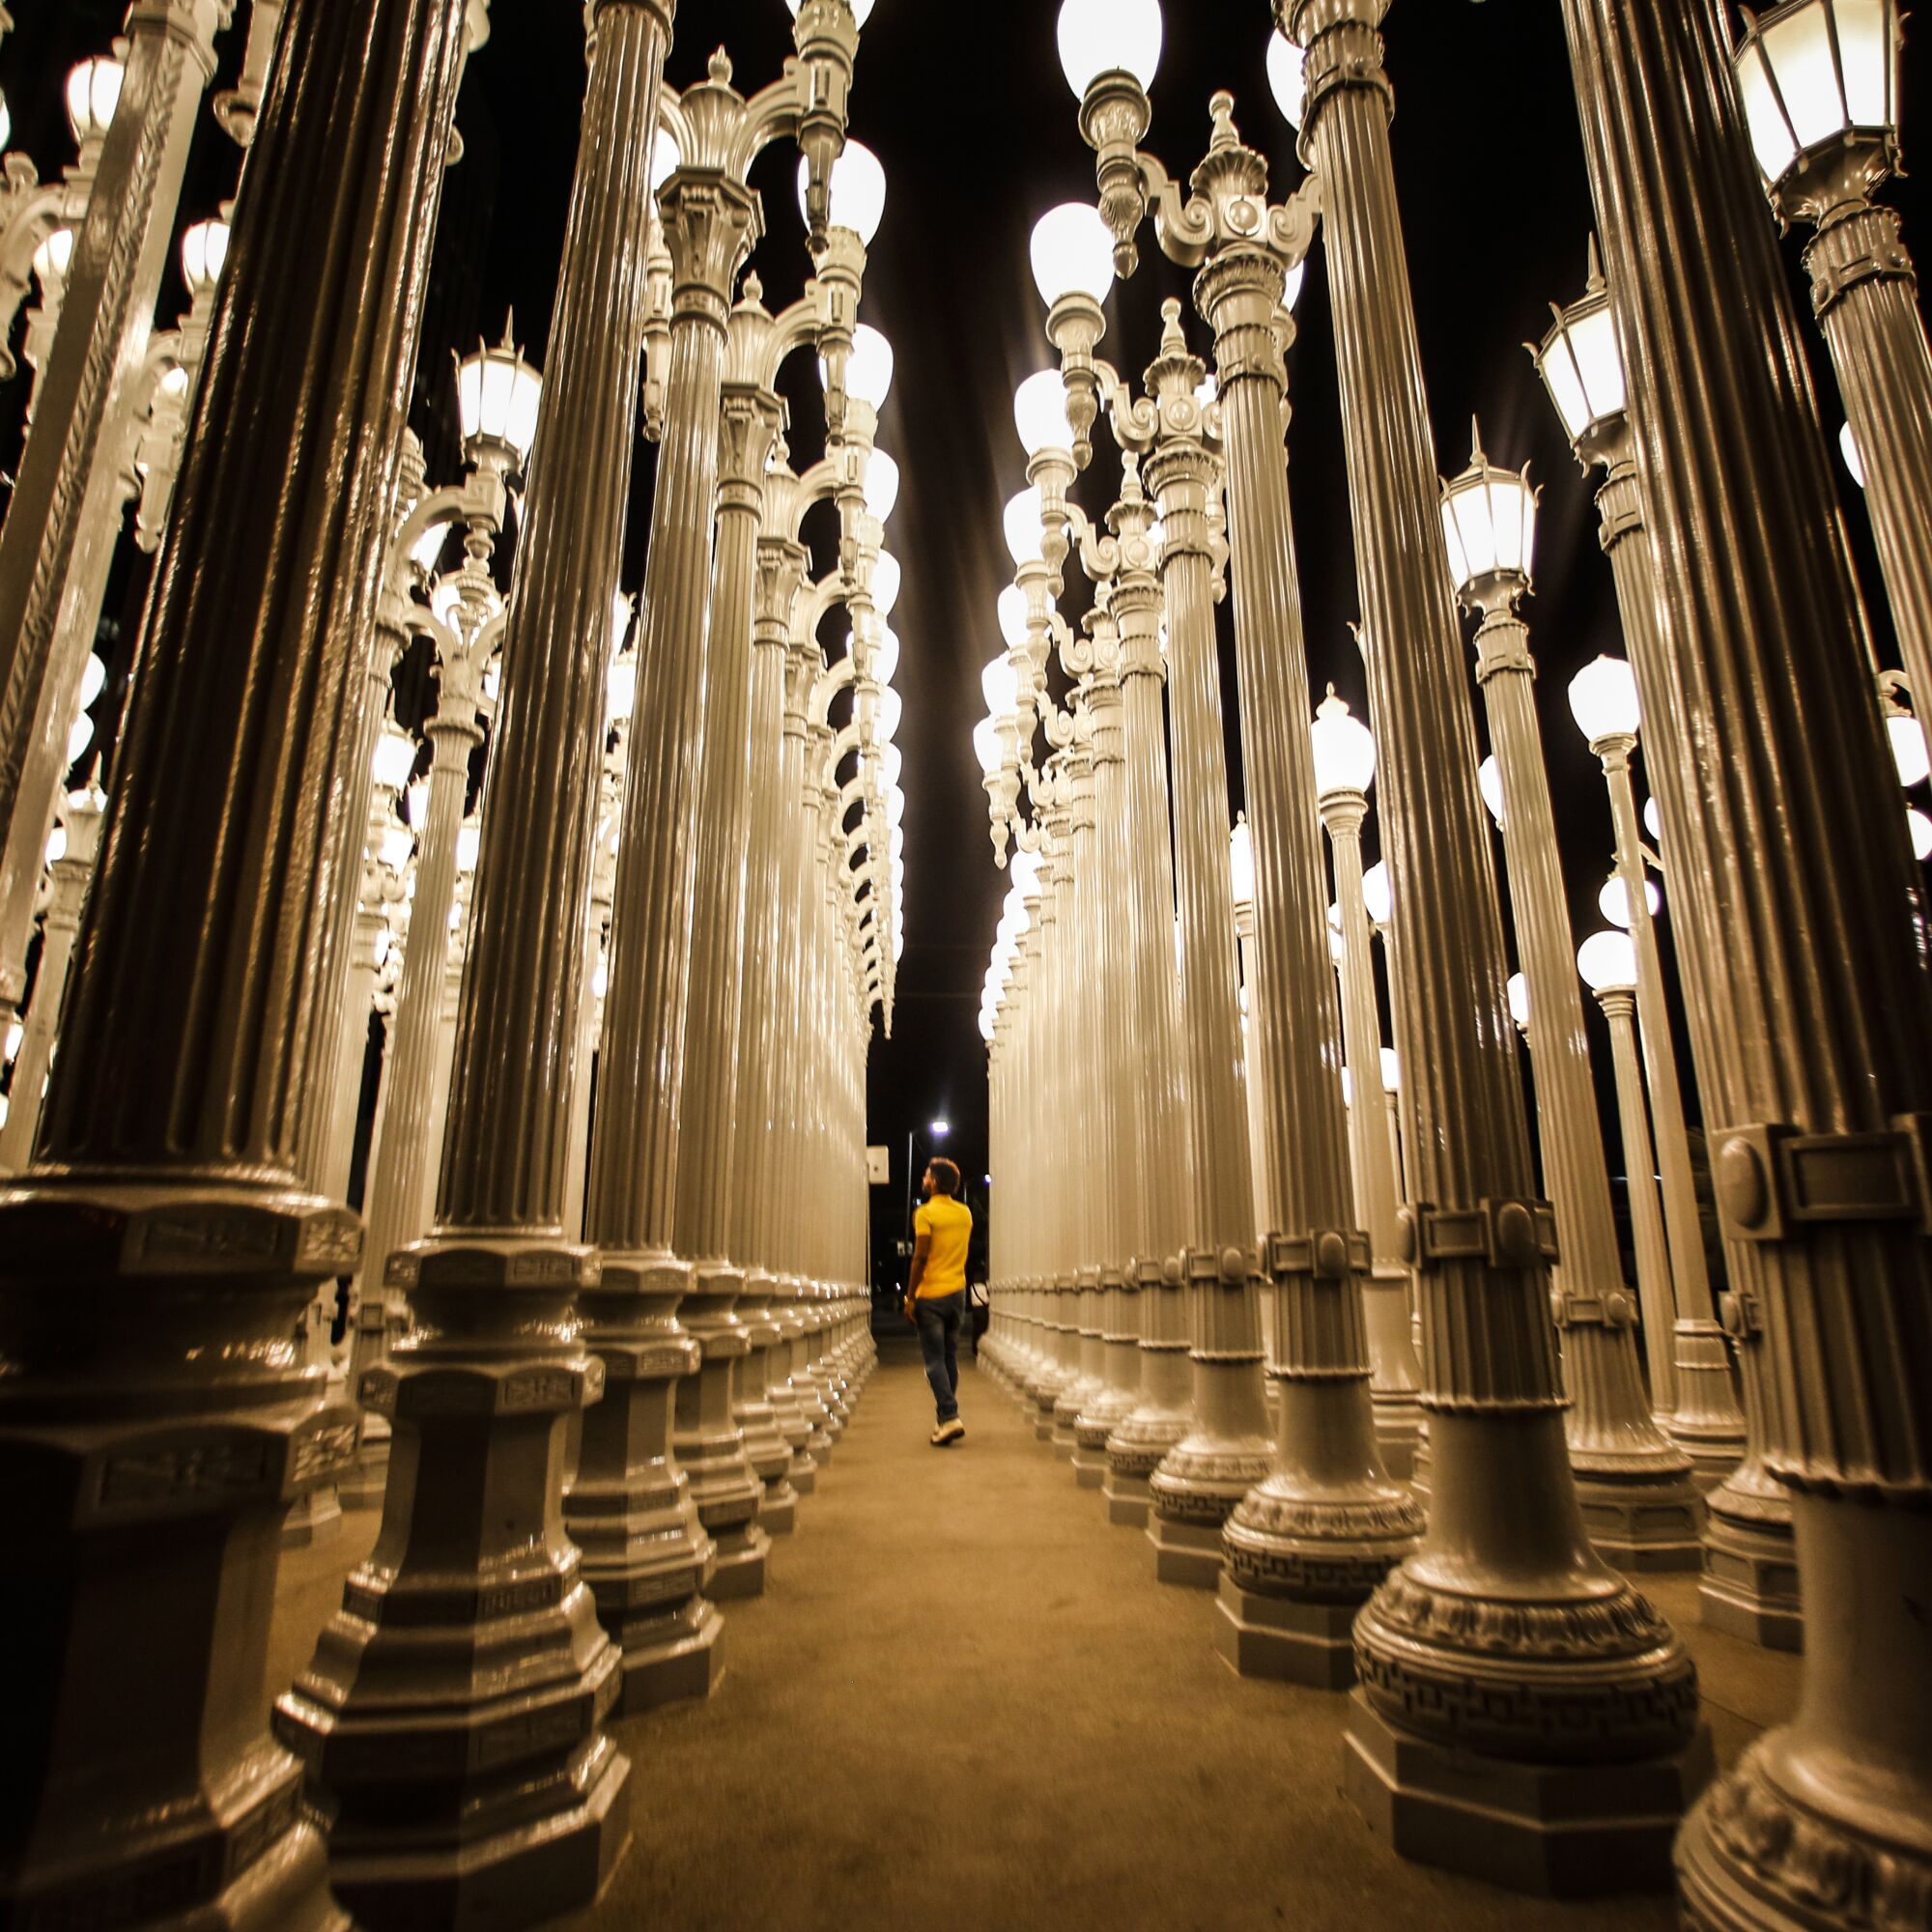 Chris Burden's "Urban Light" installation at LACMA has become one of the city's most popular landmarks.